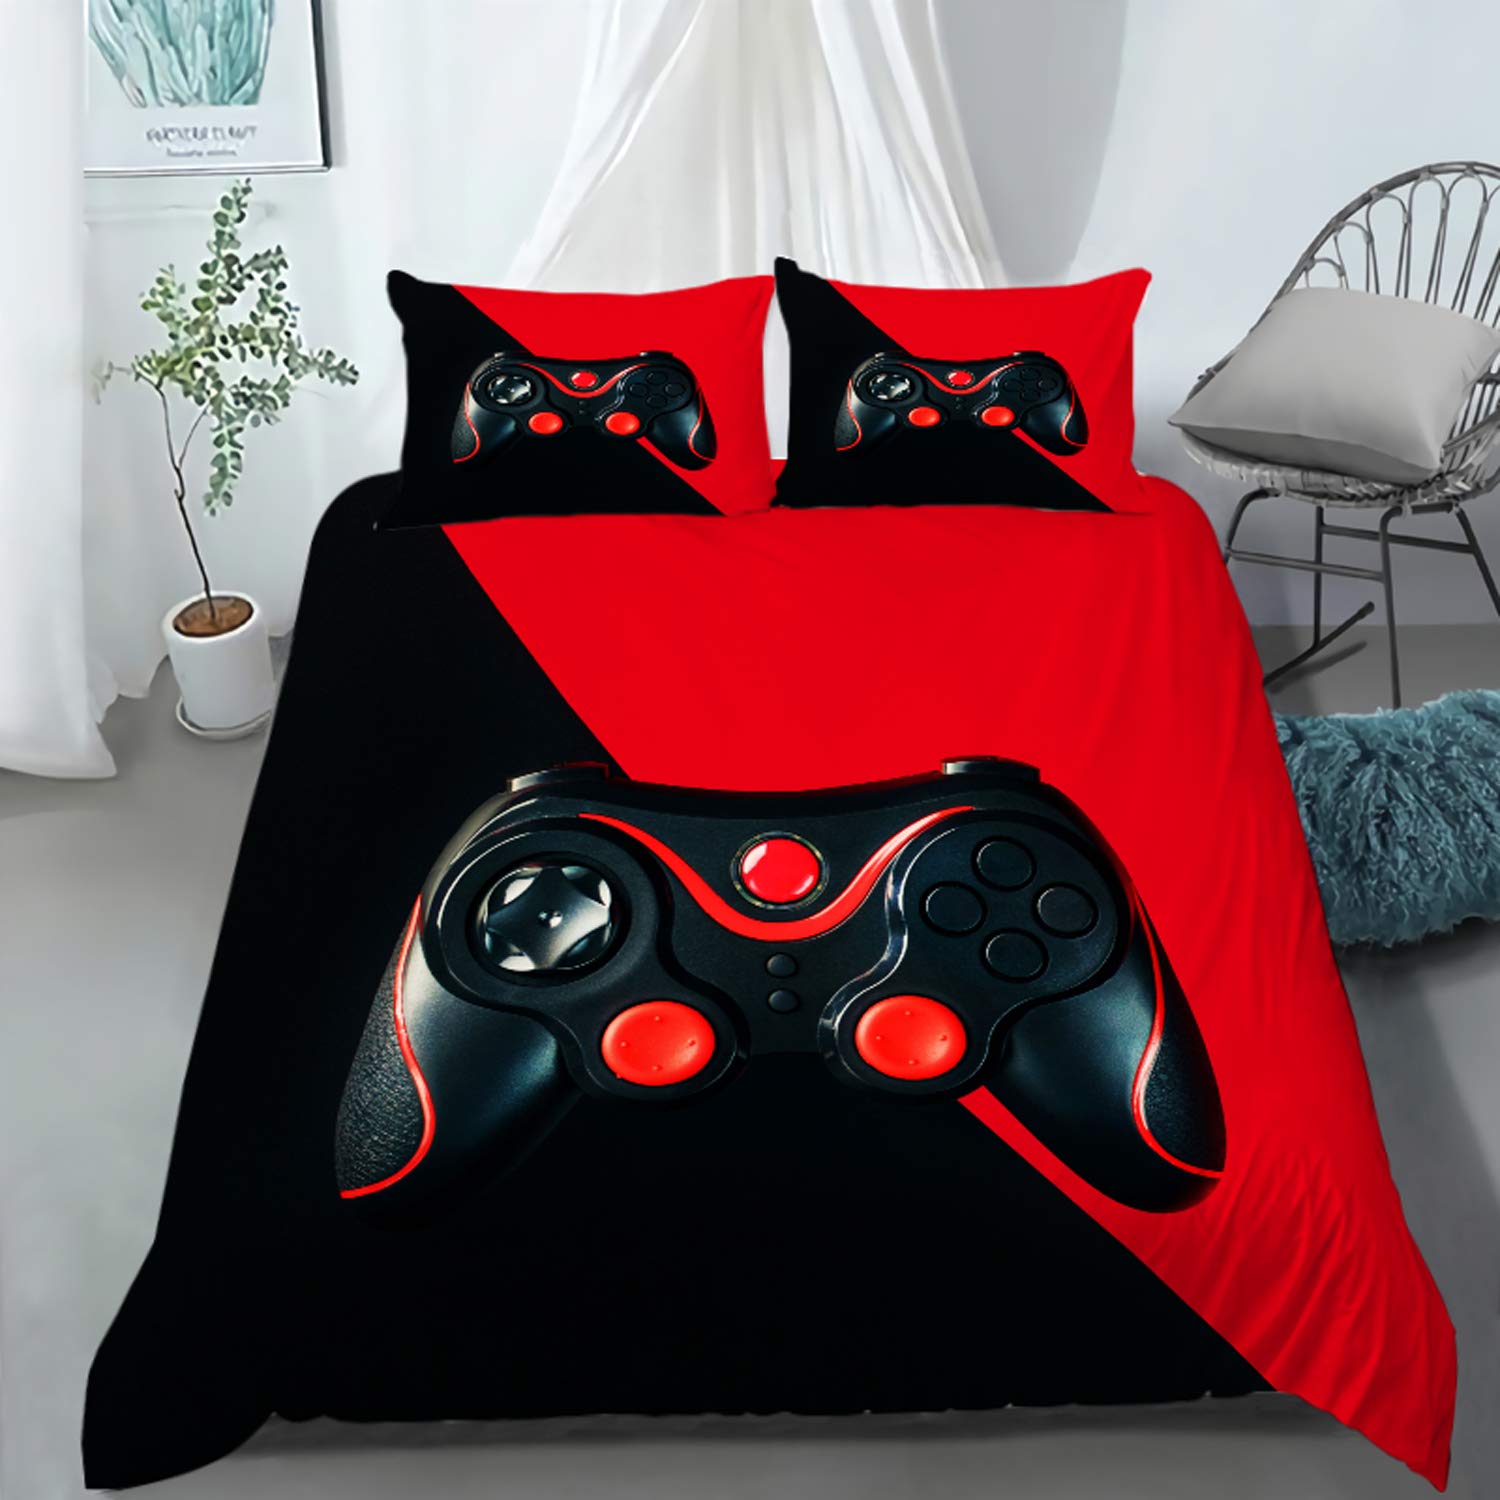 Great Choice Products Gamer Bedding Sets For Boys, Gaming Duvet Cover Set Twin Size,Boys Video Games Comforter Cover, Bed Set For Teen Boys Bedr…